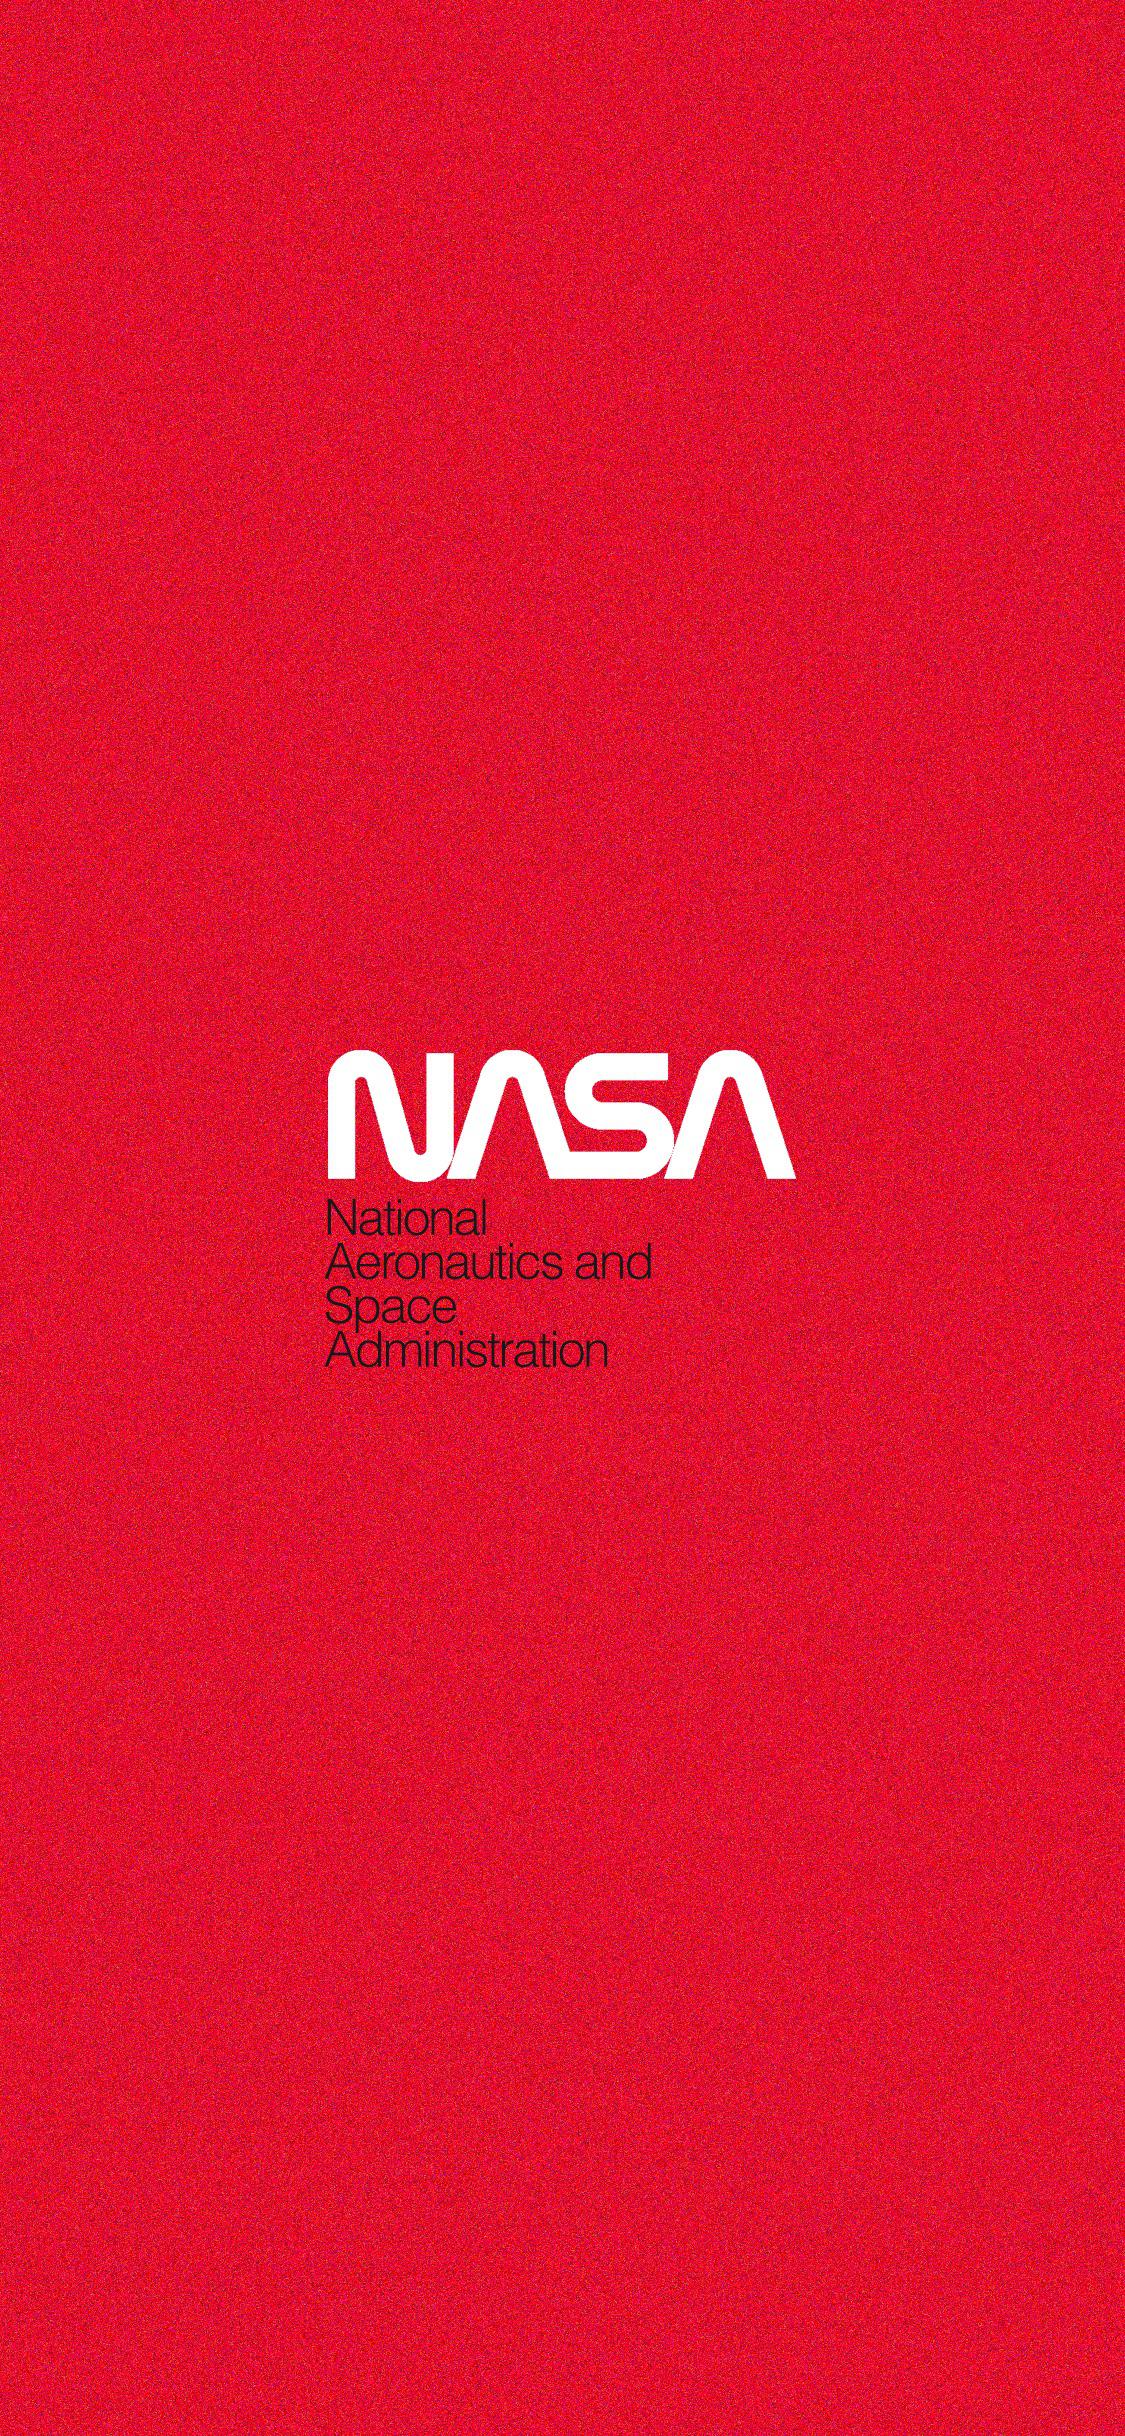 Made This Simple Retro Nasa Wallpaper For My iPhone Thought I D